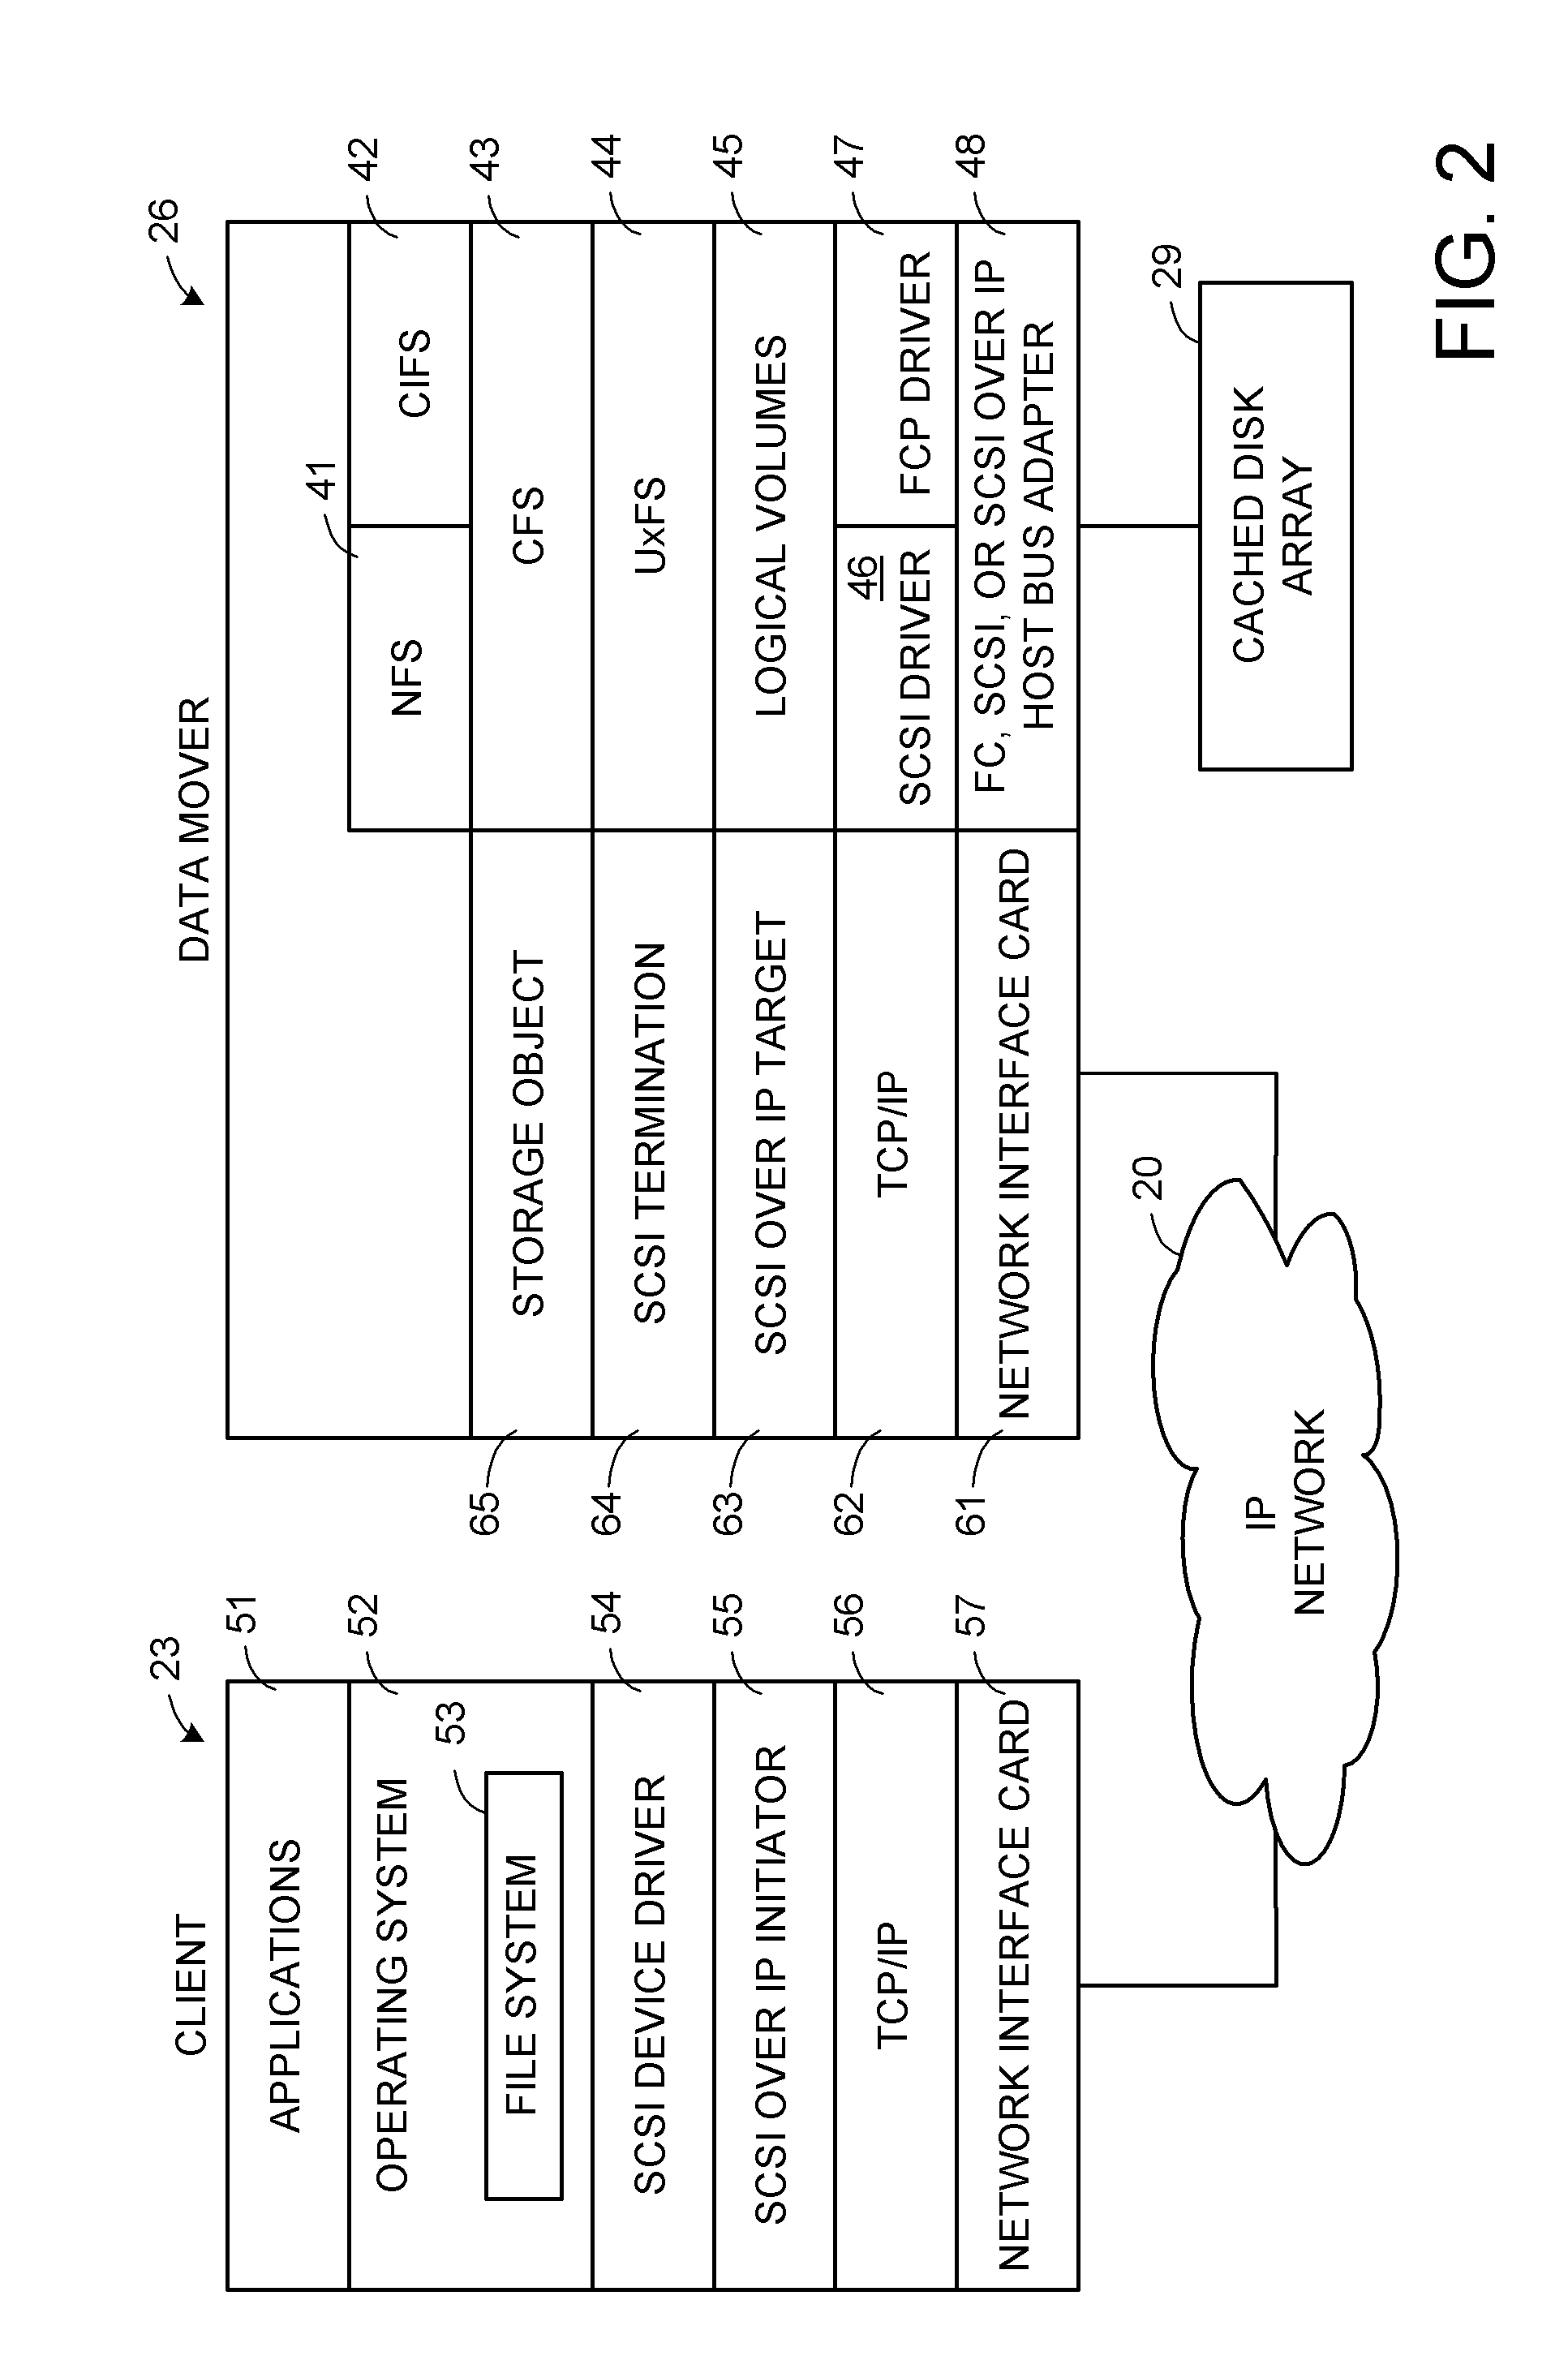 Multi-protocol sharable virtual storage objects